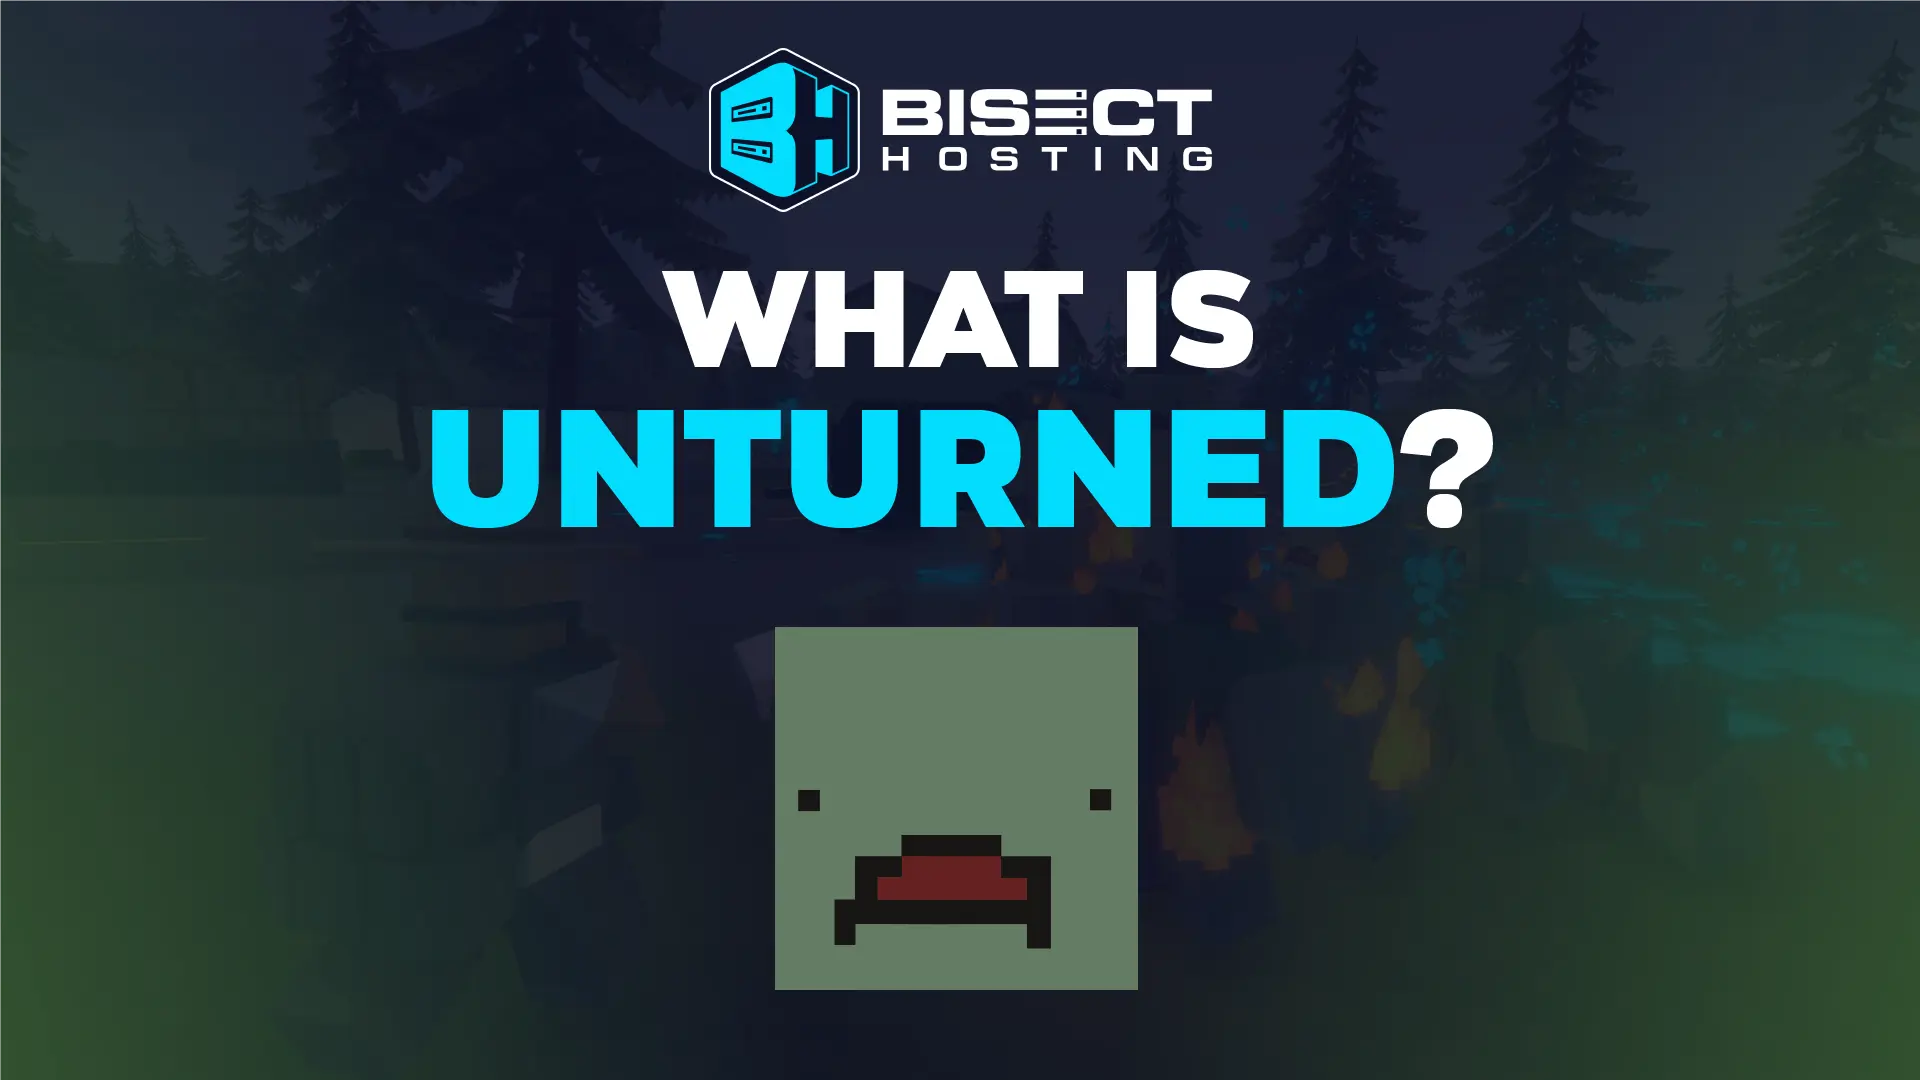 What is Unturned?